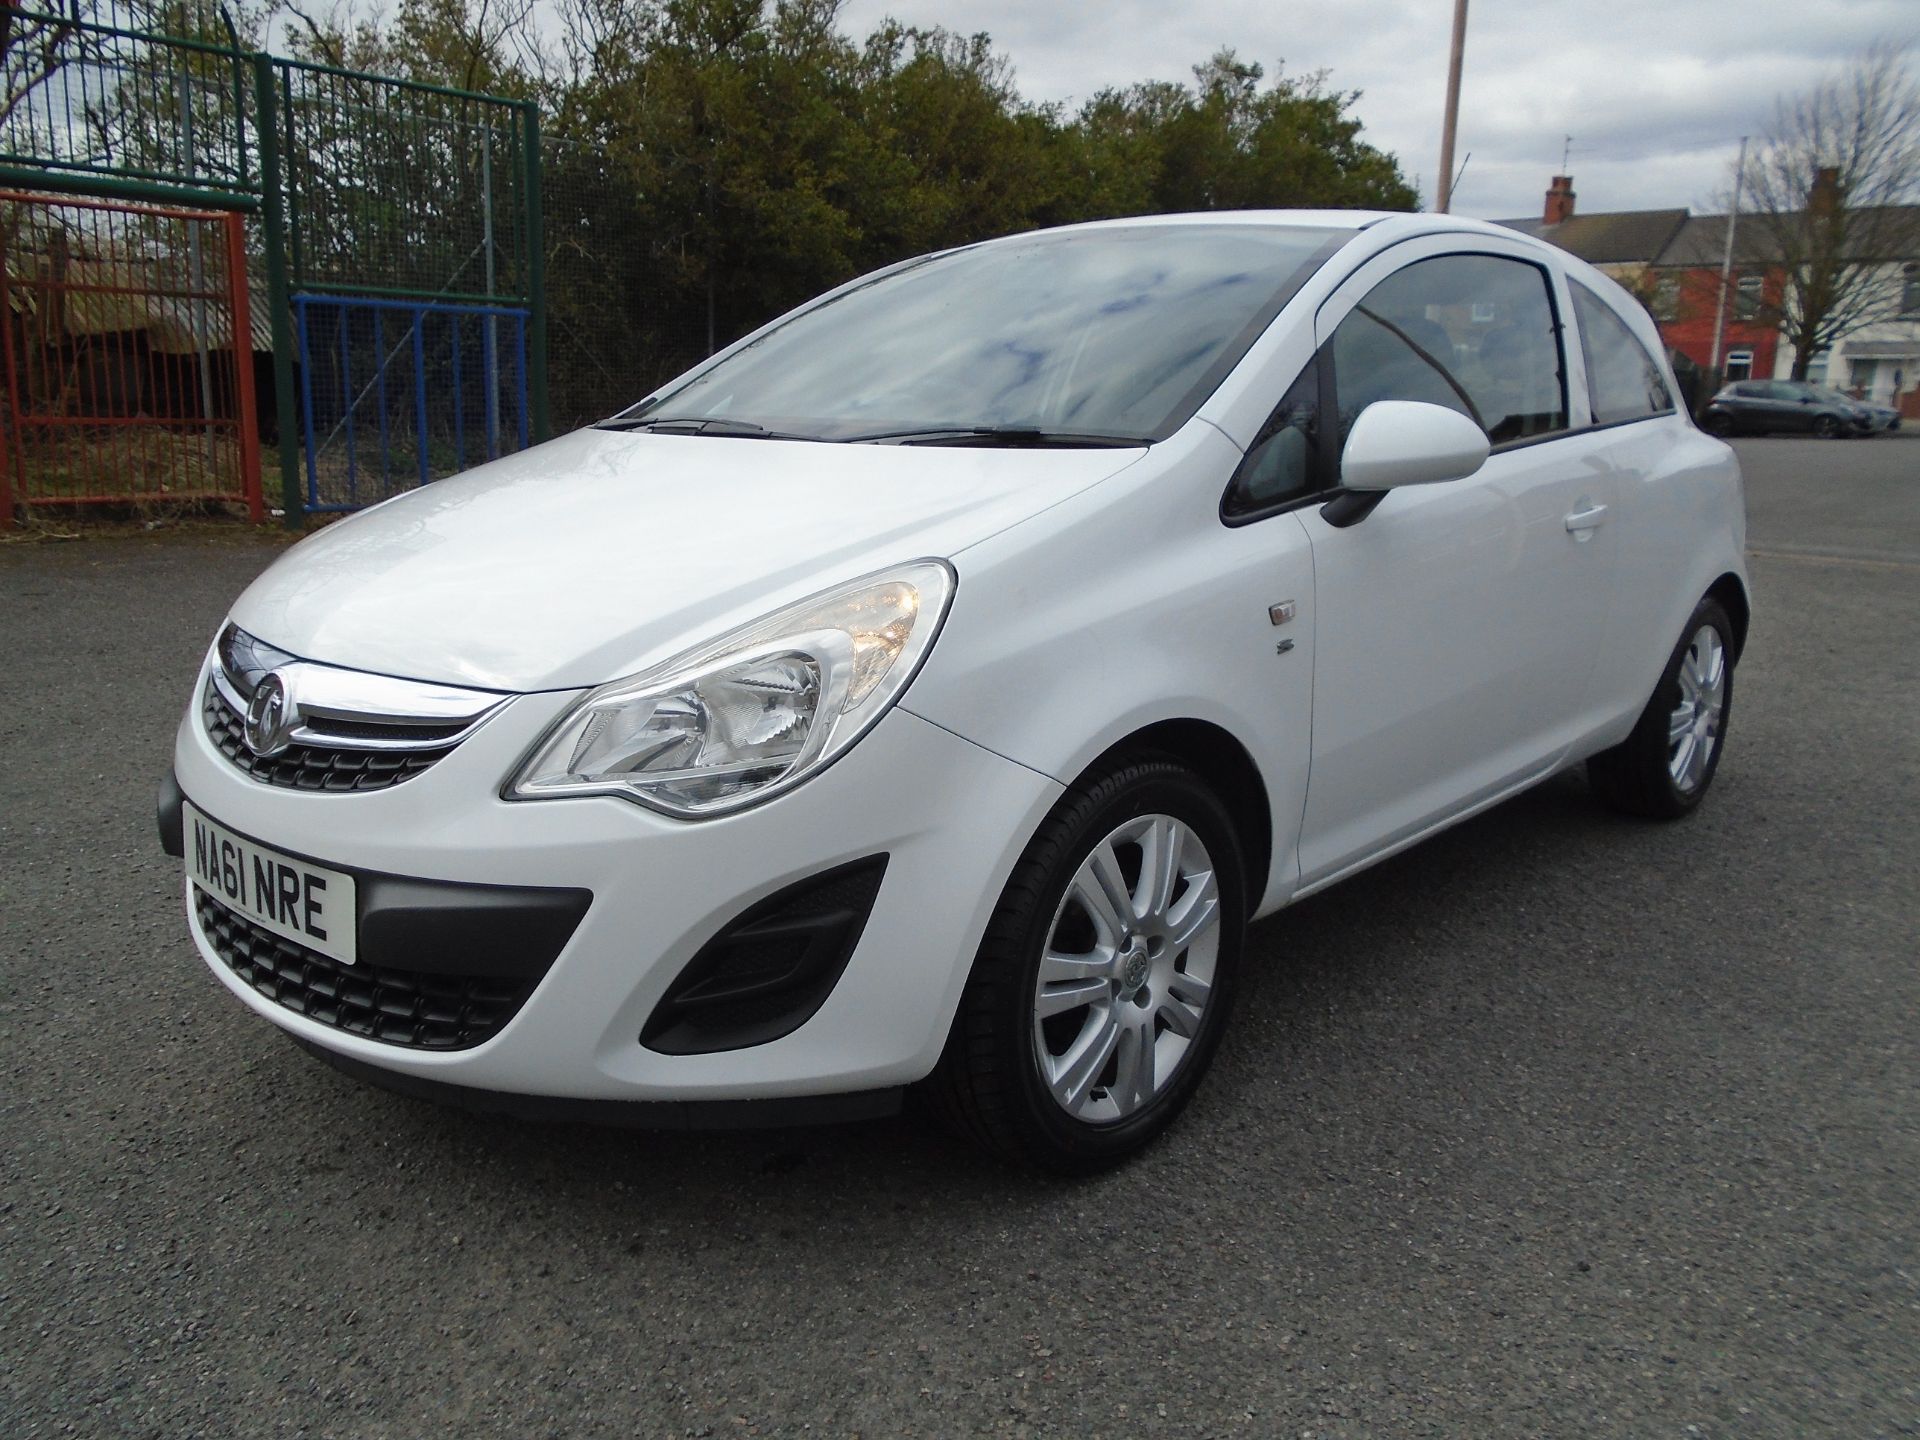 2011/61 REG VAUXHALL CORSA S ECOFLEX 998CC PETROL WHITE 3DR HATCHBACK, SHOWING 3 FORMER KEEPERS - Image 3 of 8